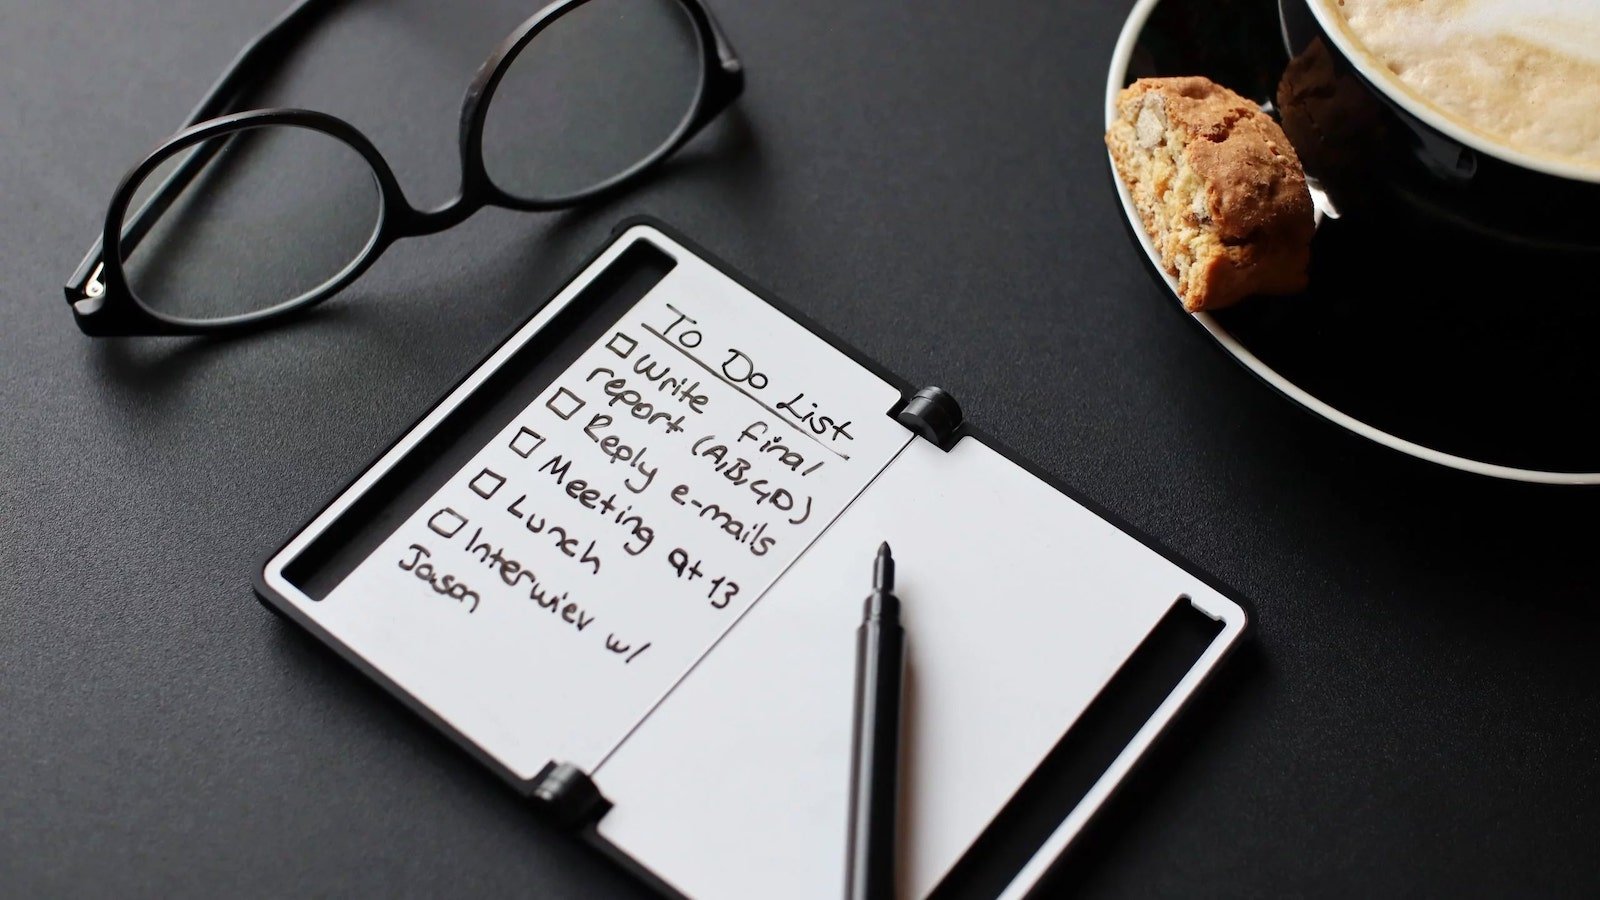 MEMO whiteboard wallet stimulates your creativity and improves your productivity